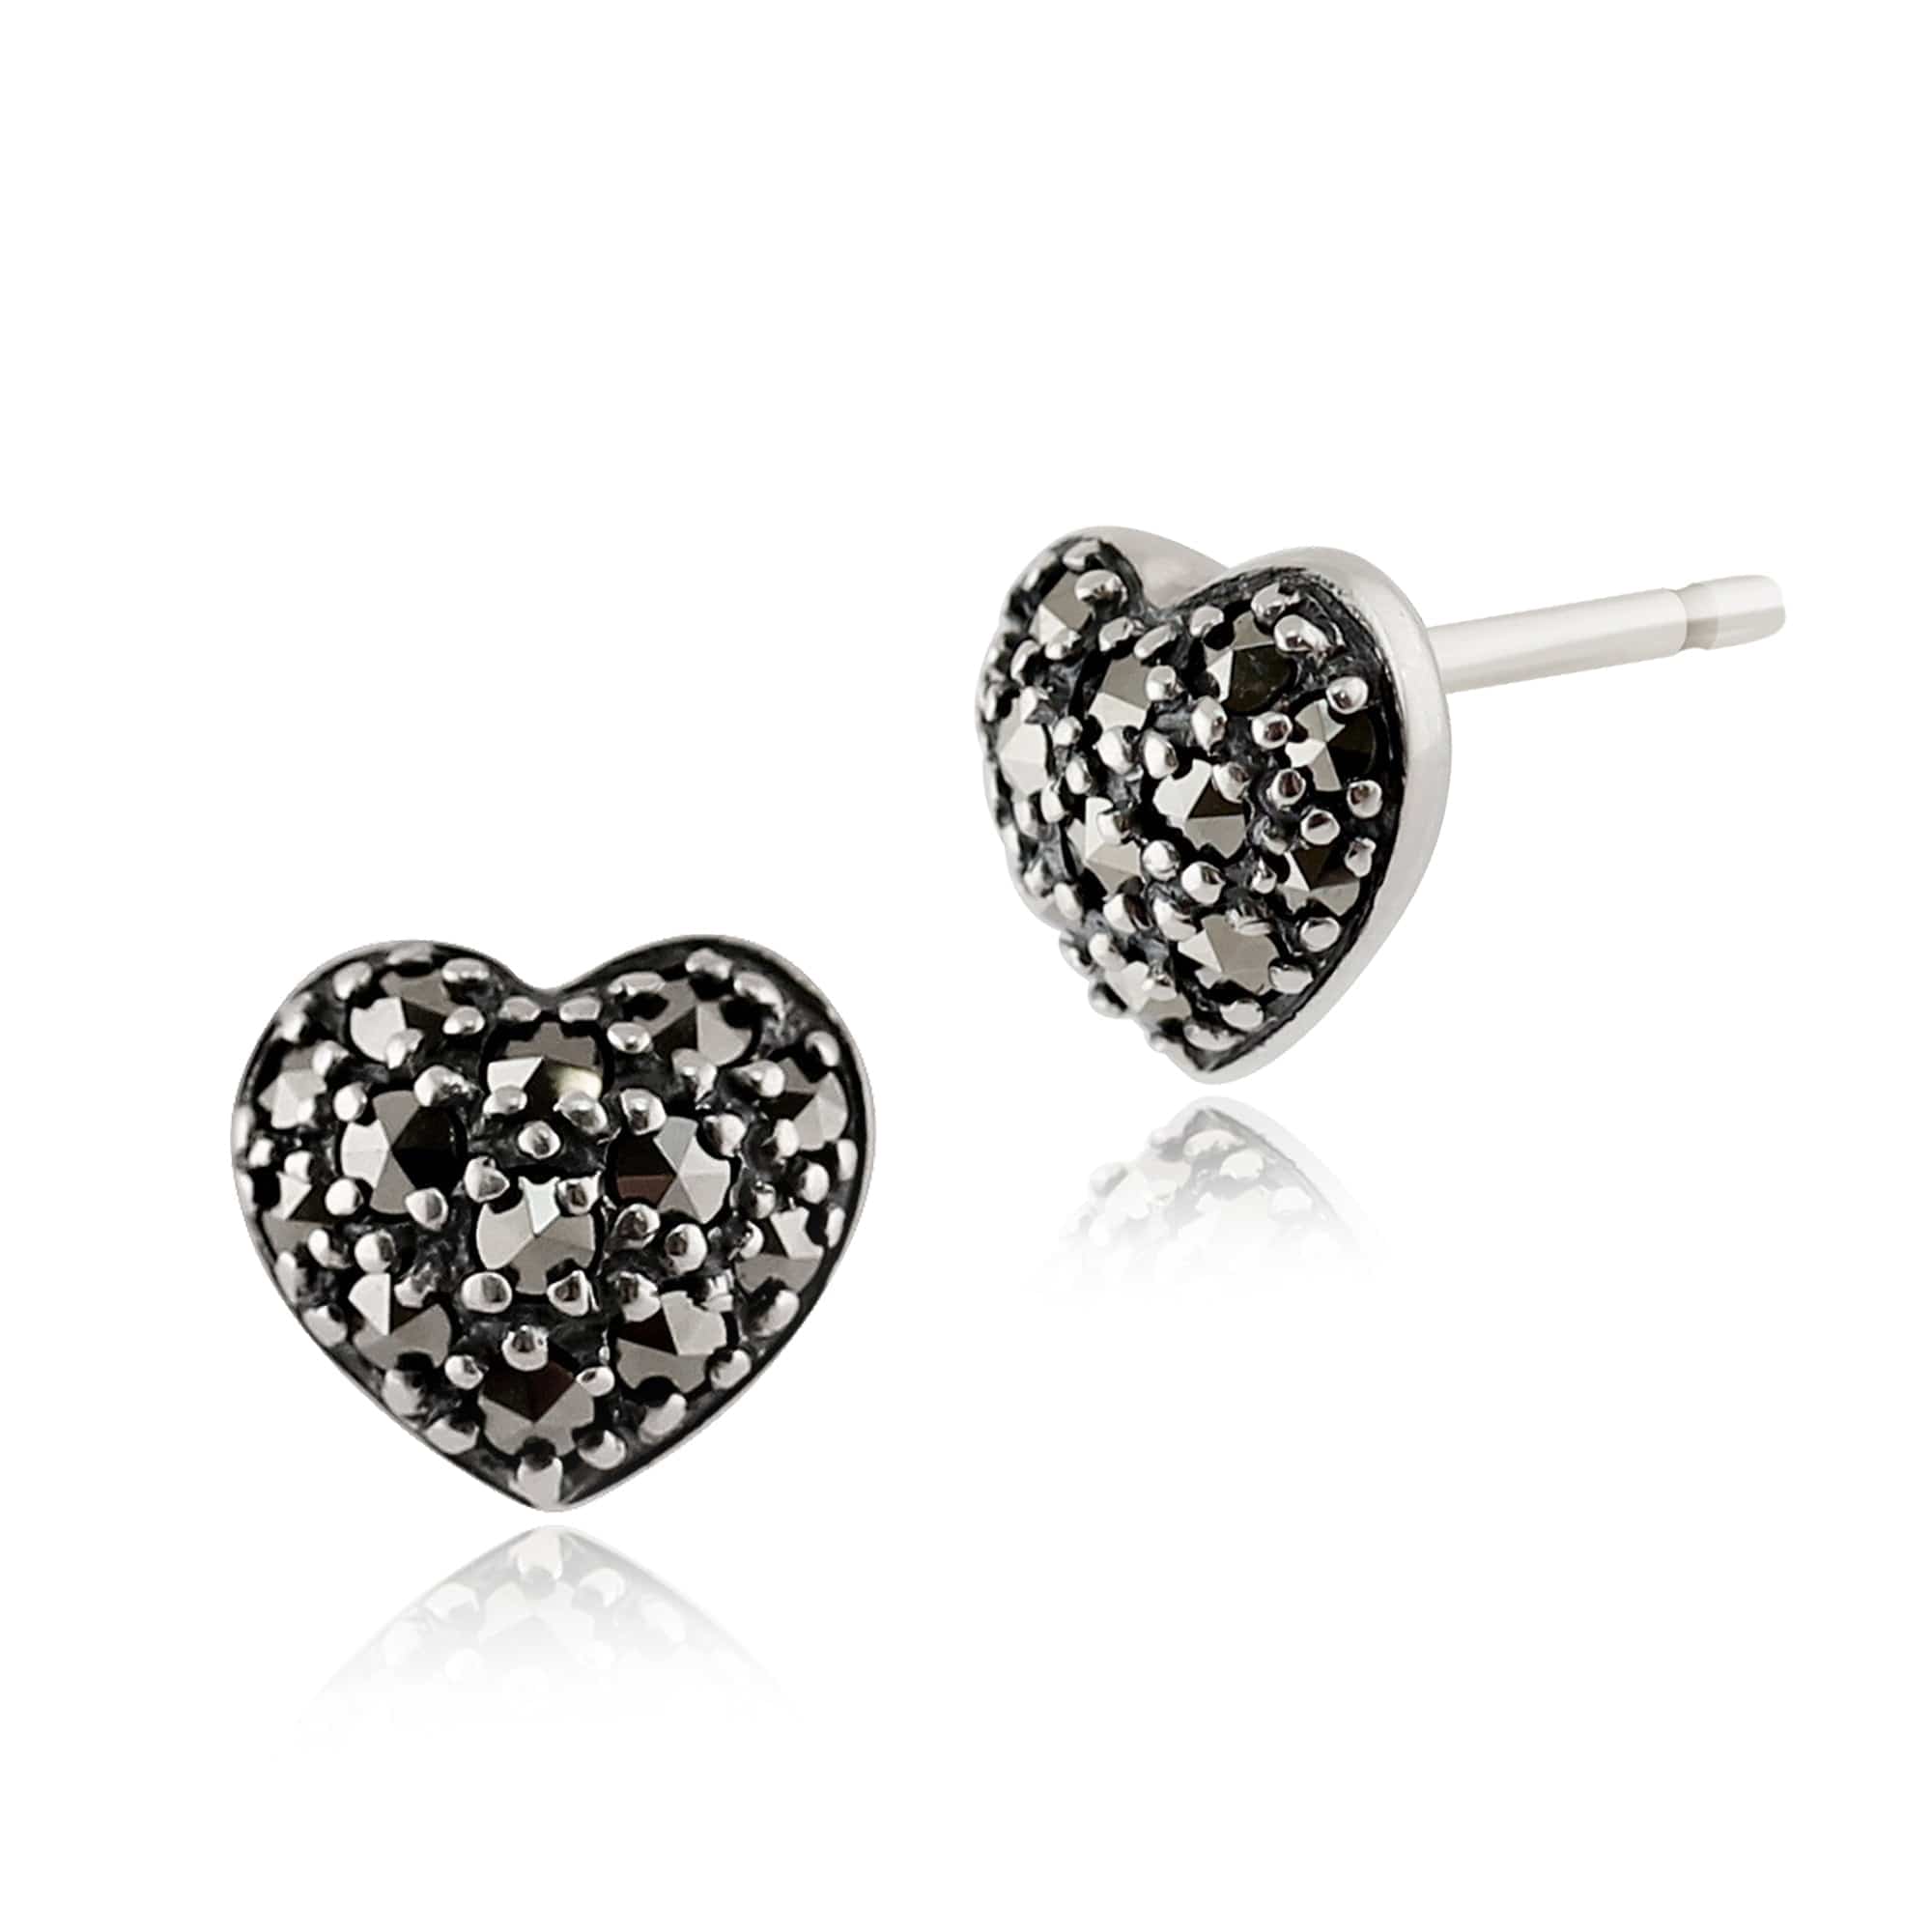 Classic Round Marcasite Pave Set Heart Stud Earrings in 925 Sterling Silver - Gemondo